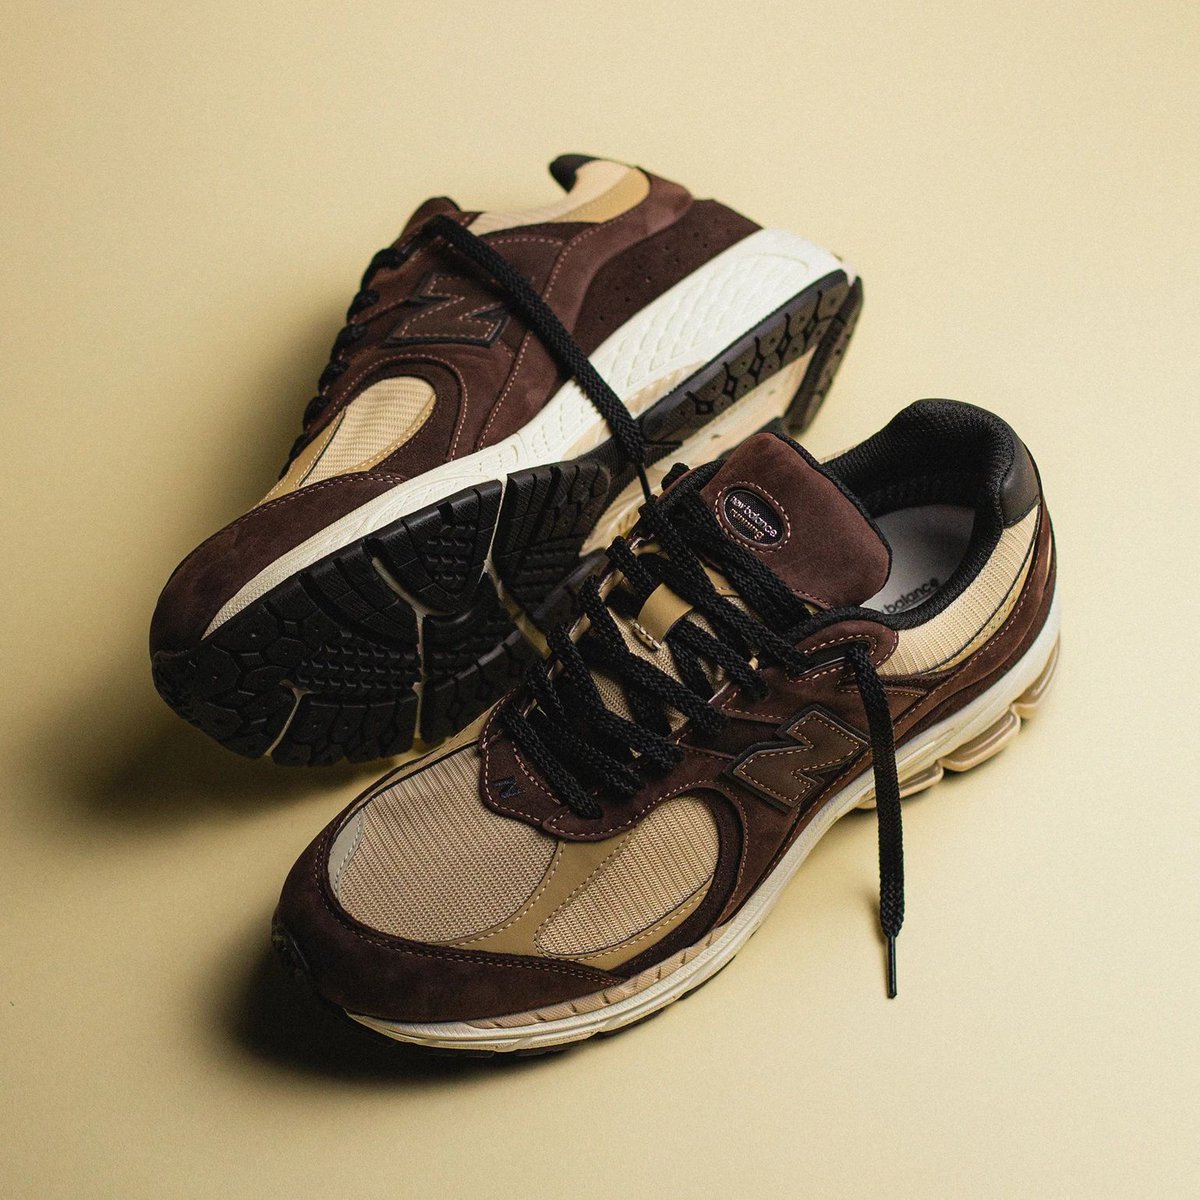 PRICE DROP: 40% OFF the New Balance 2002R GORE-TEX 'Coffee' 

BUY HERE: bit.ly/3WhcxTs